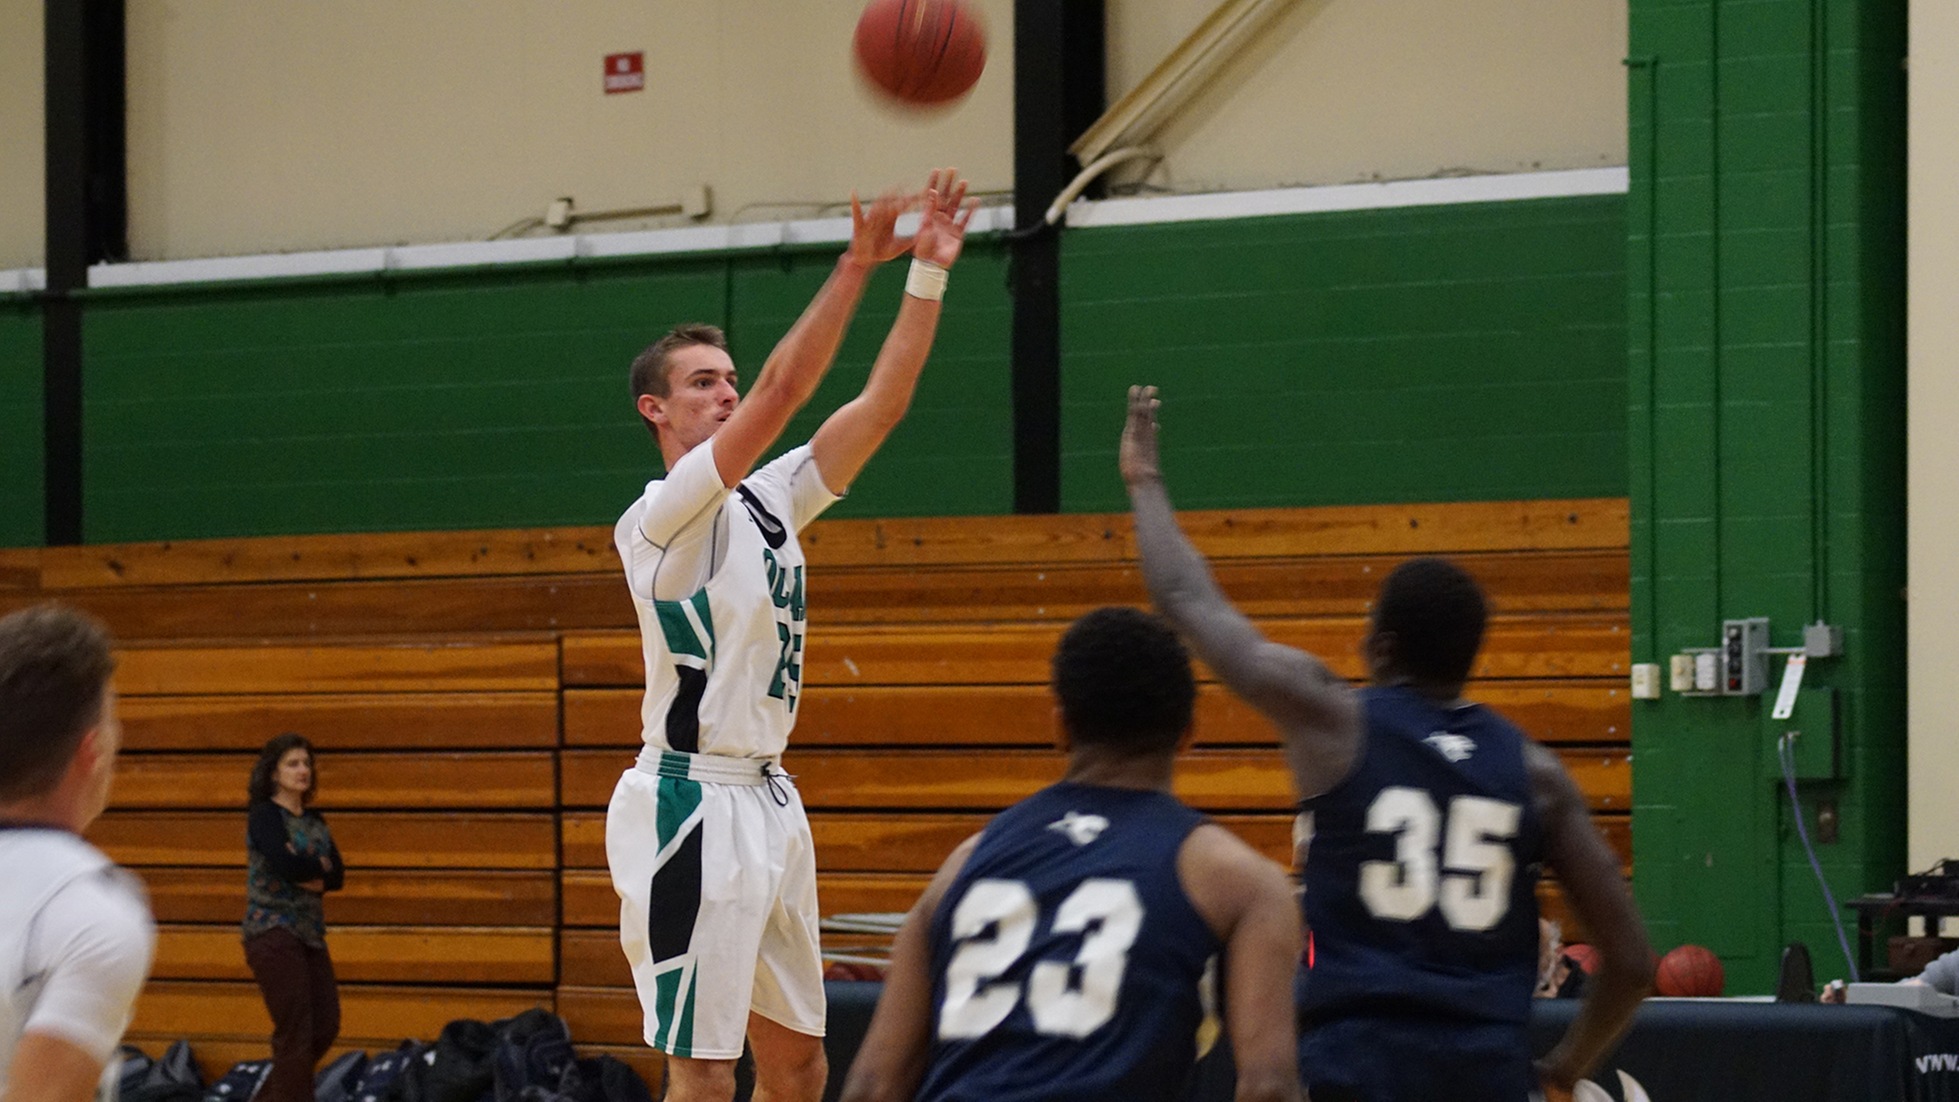 Vikings Win 2nd Straight in 95-68 Defeat of Atlantic Cape CC